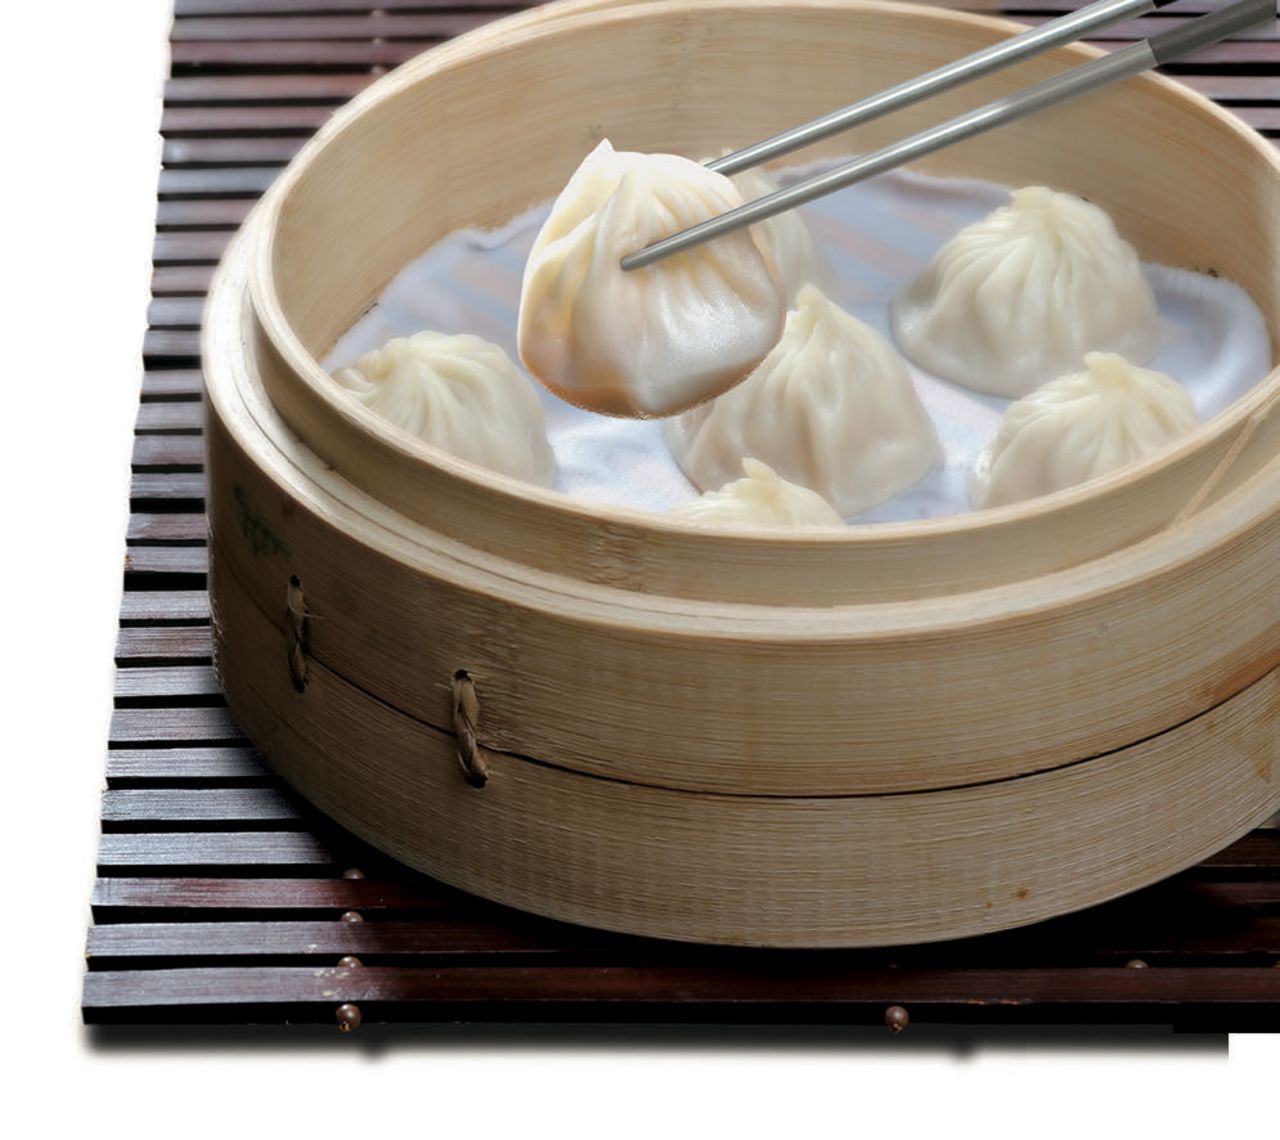 <strong>Best dumplings:</strong> "Soup dumplings -- amazing. I had to a get a lesson on how to properly eat them, it was great," says Forgione of Din Tai Fung's award-winning steamed pork dumplings.